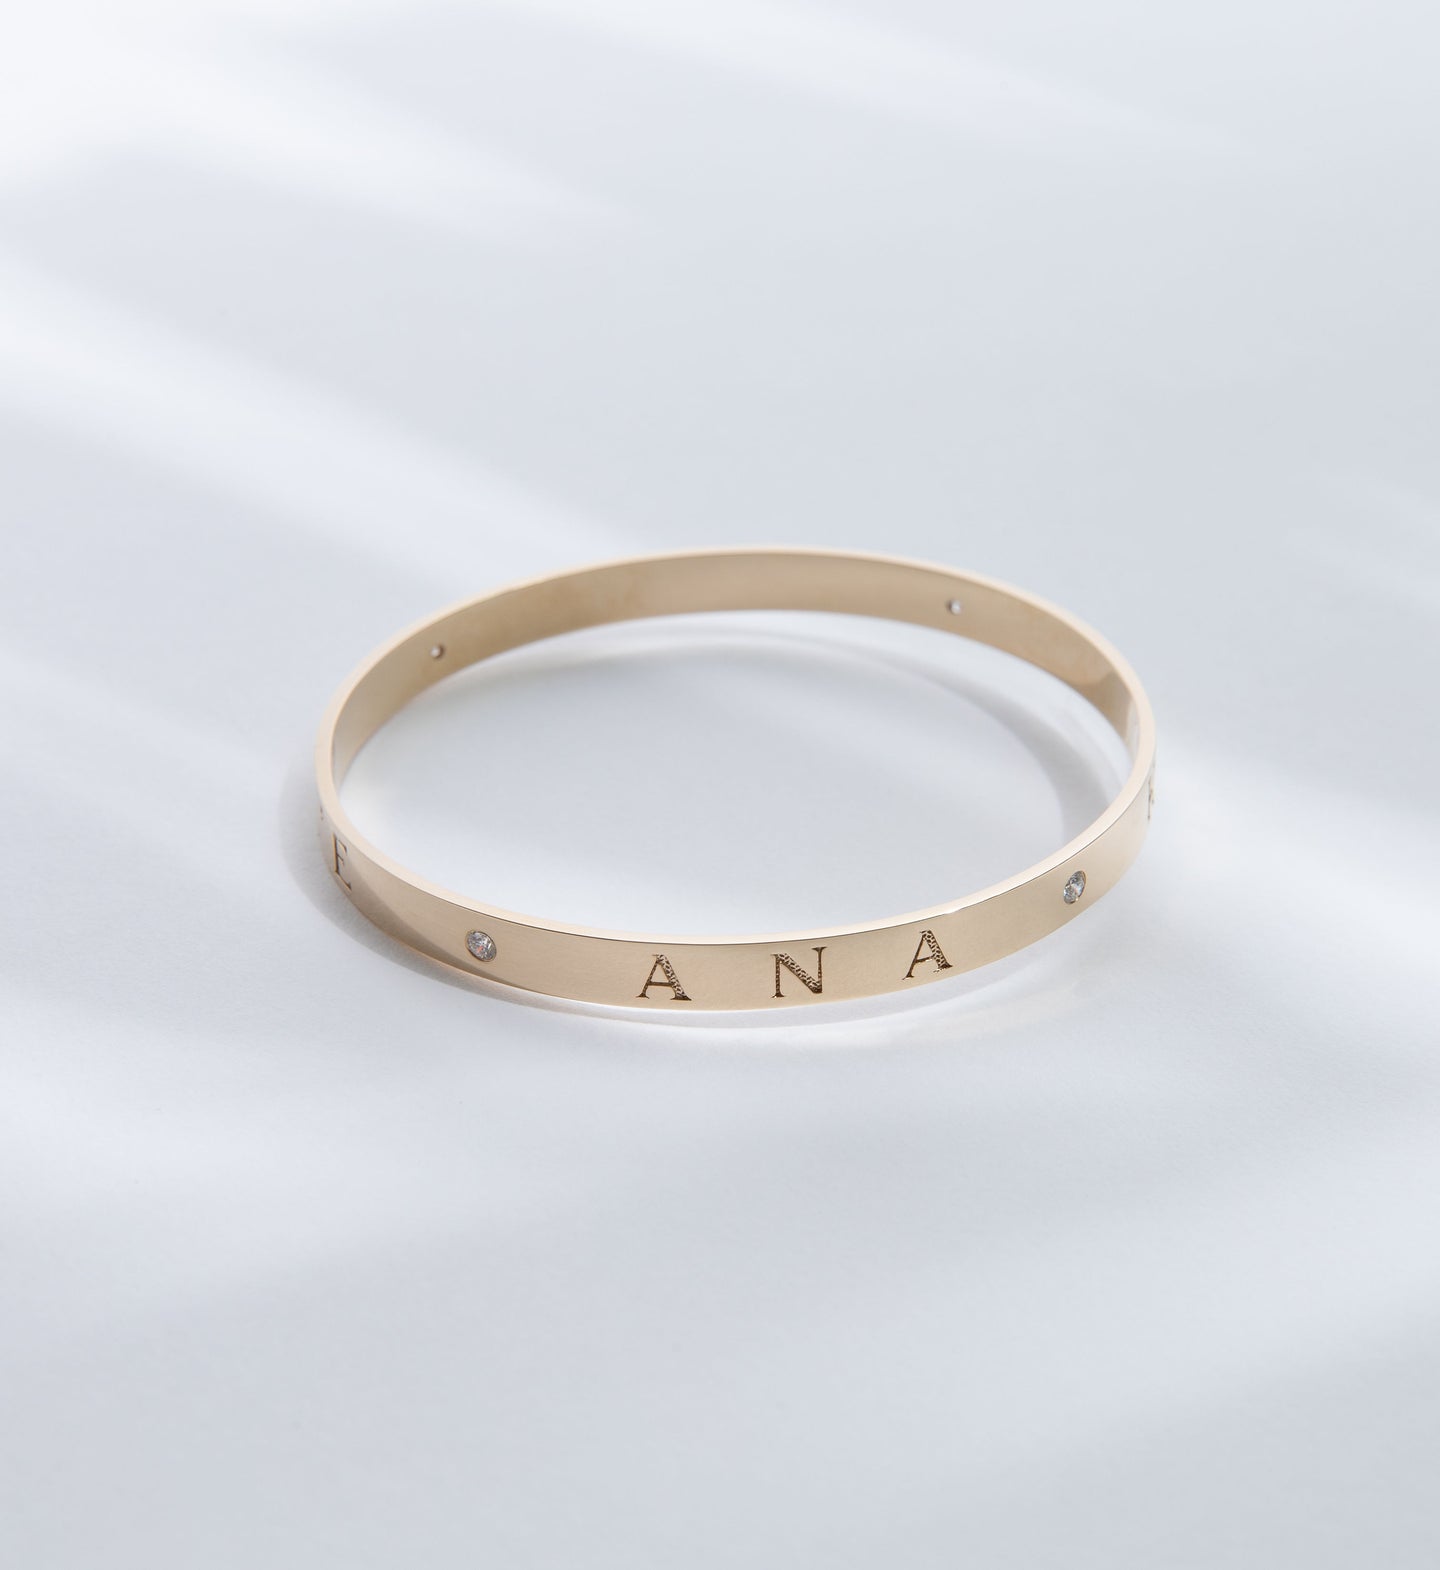 Hie Aloha Nui bangle bracelet in gold, engraved with the name Ana and including diamond accents